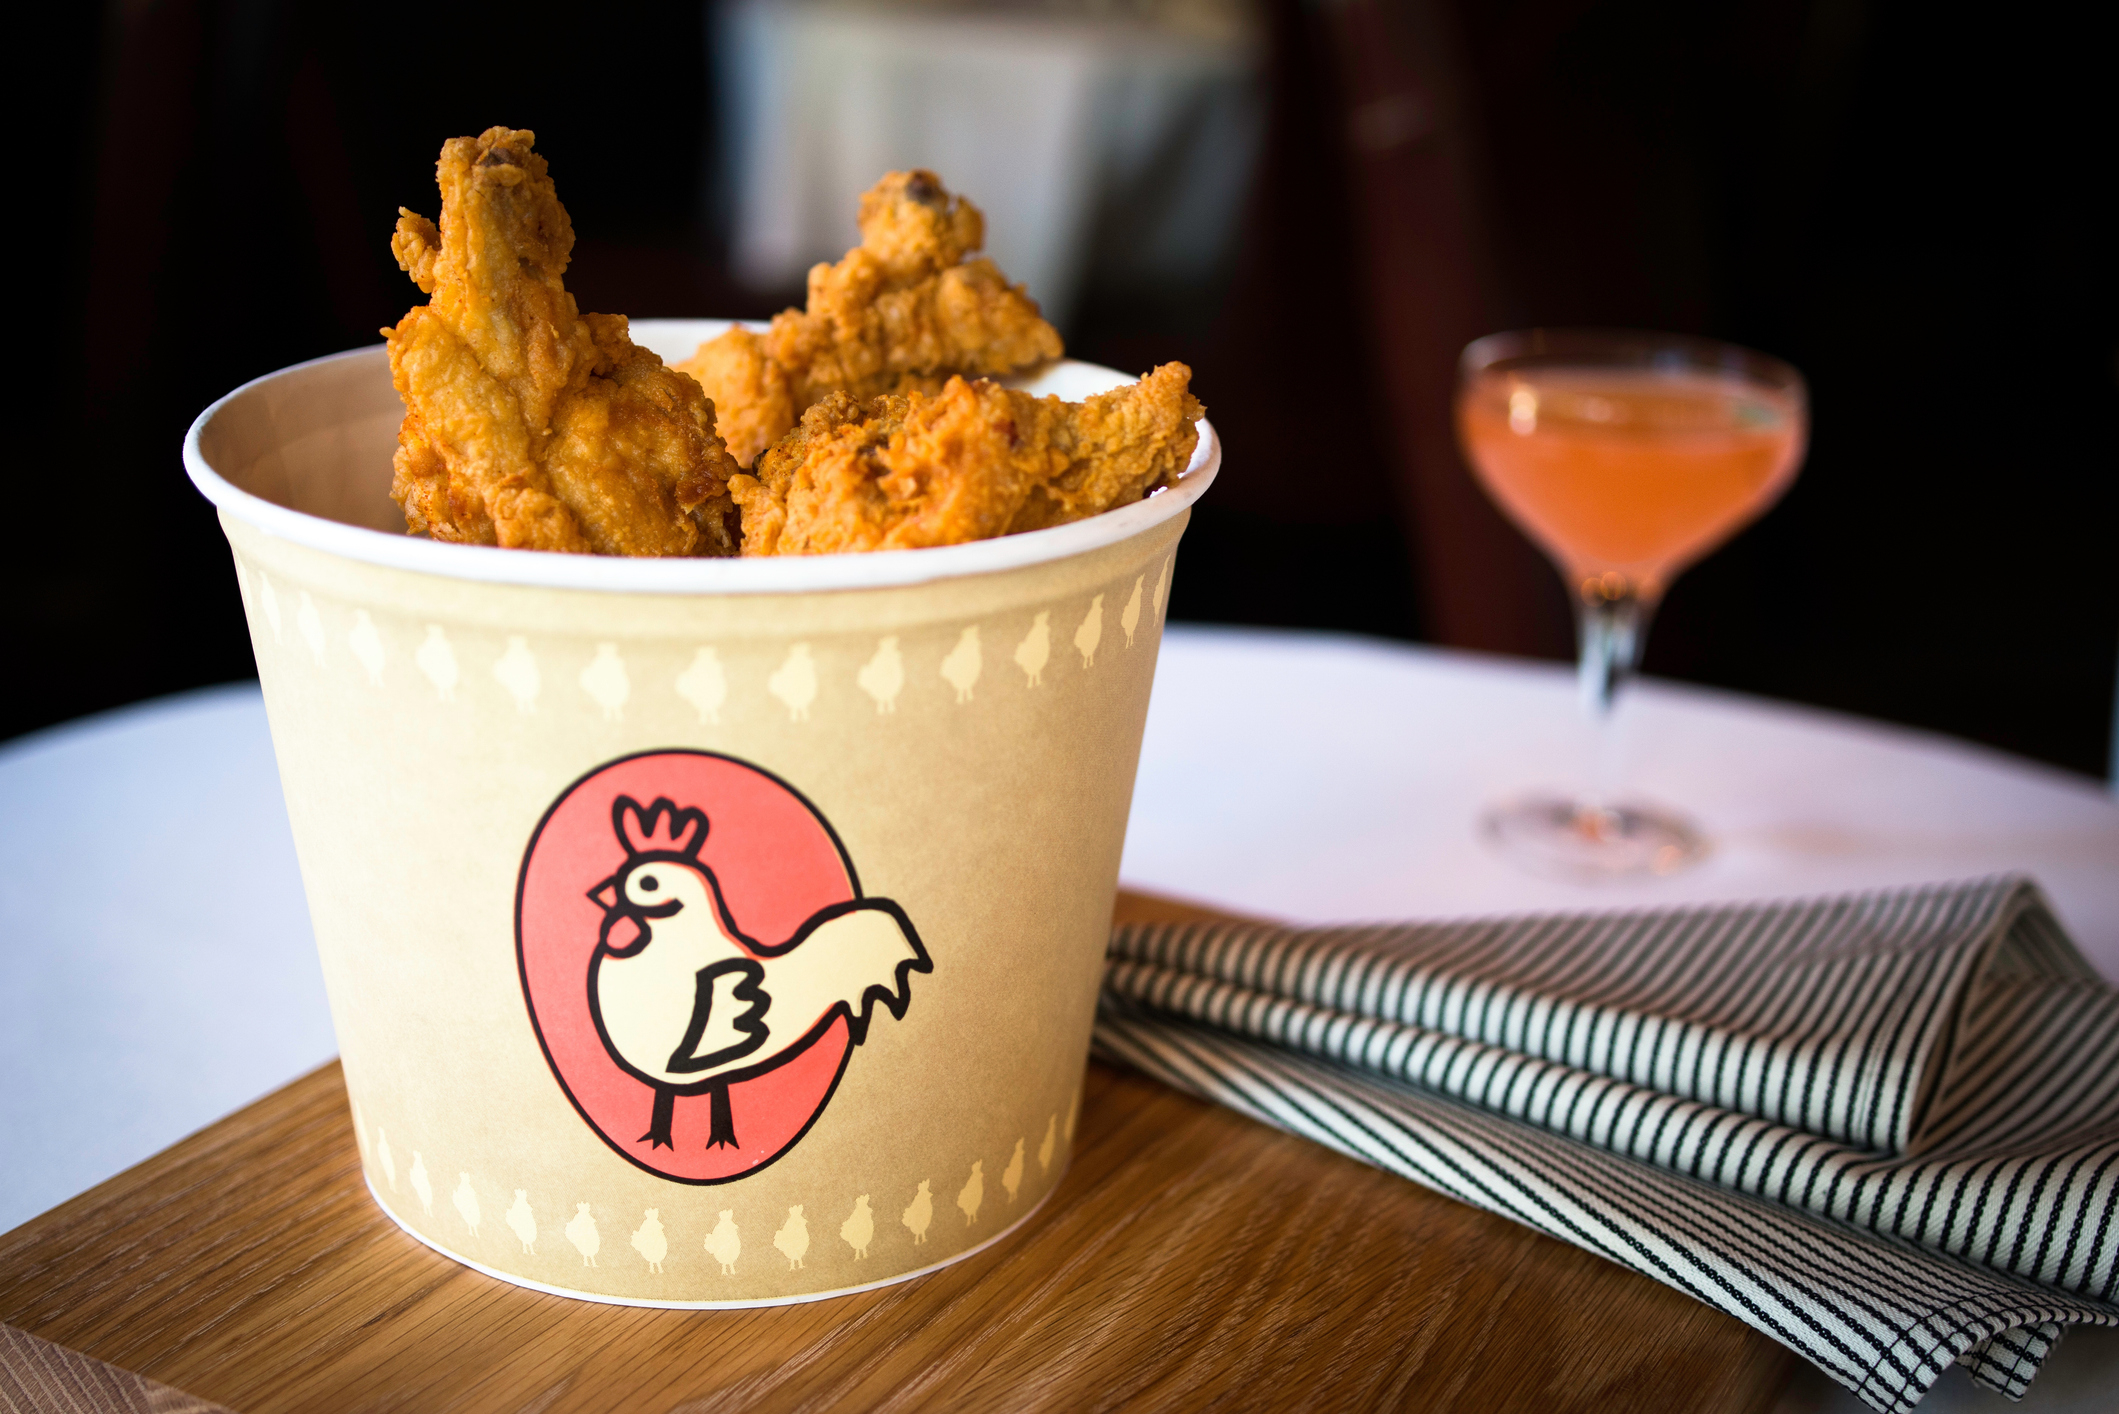 Bucket of fried chicken with a rooster logo, placed on a table with a striped napkin and a drink in the background